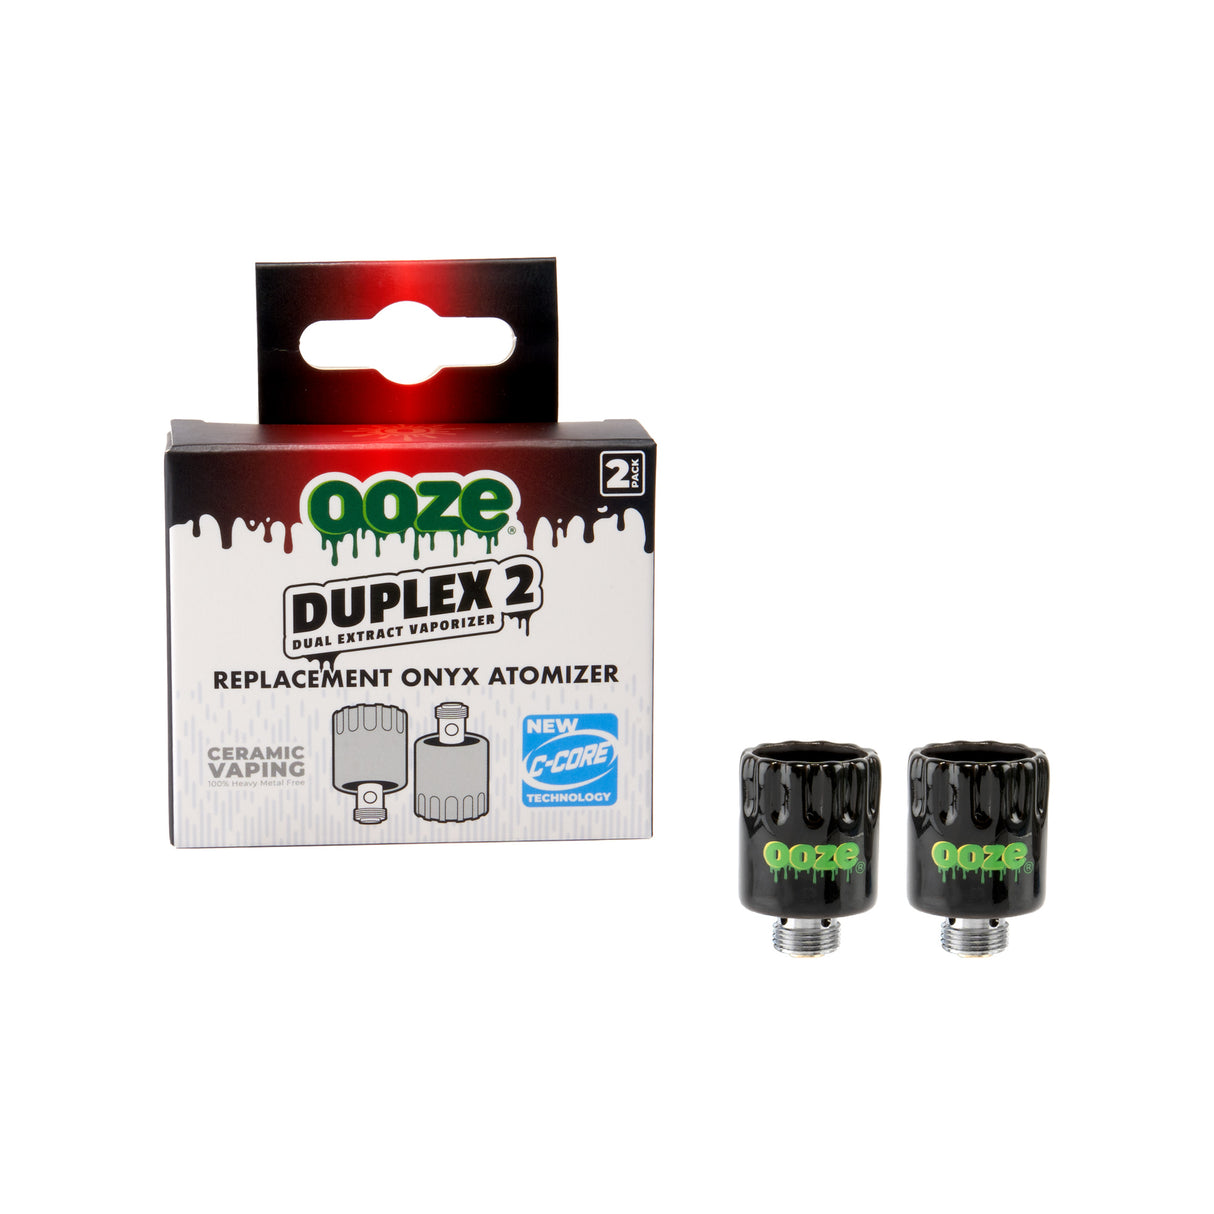 Duplex 2 Replacement Onyx Atomizer 2-Pack